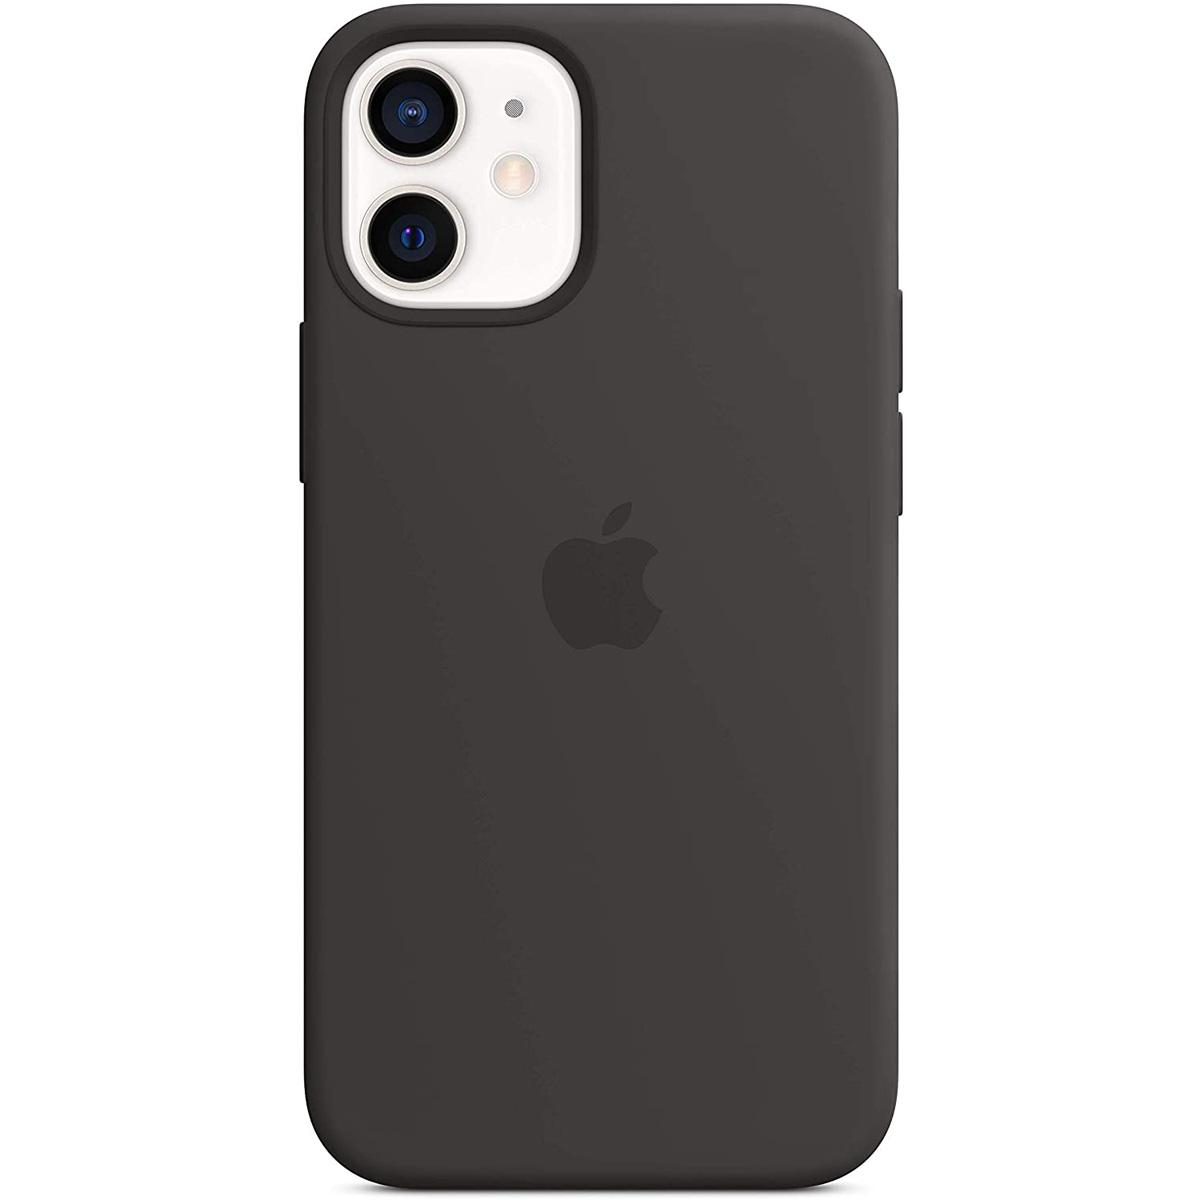 Apple iPhone 11 Black Silicone Case for $13.99